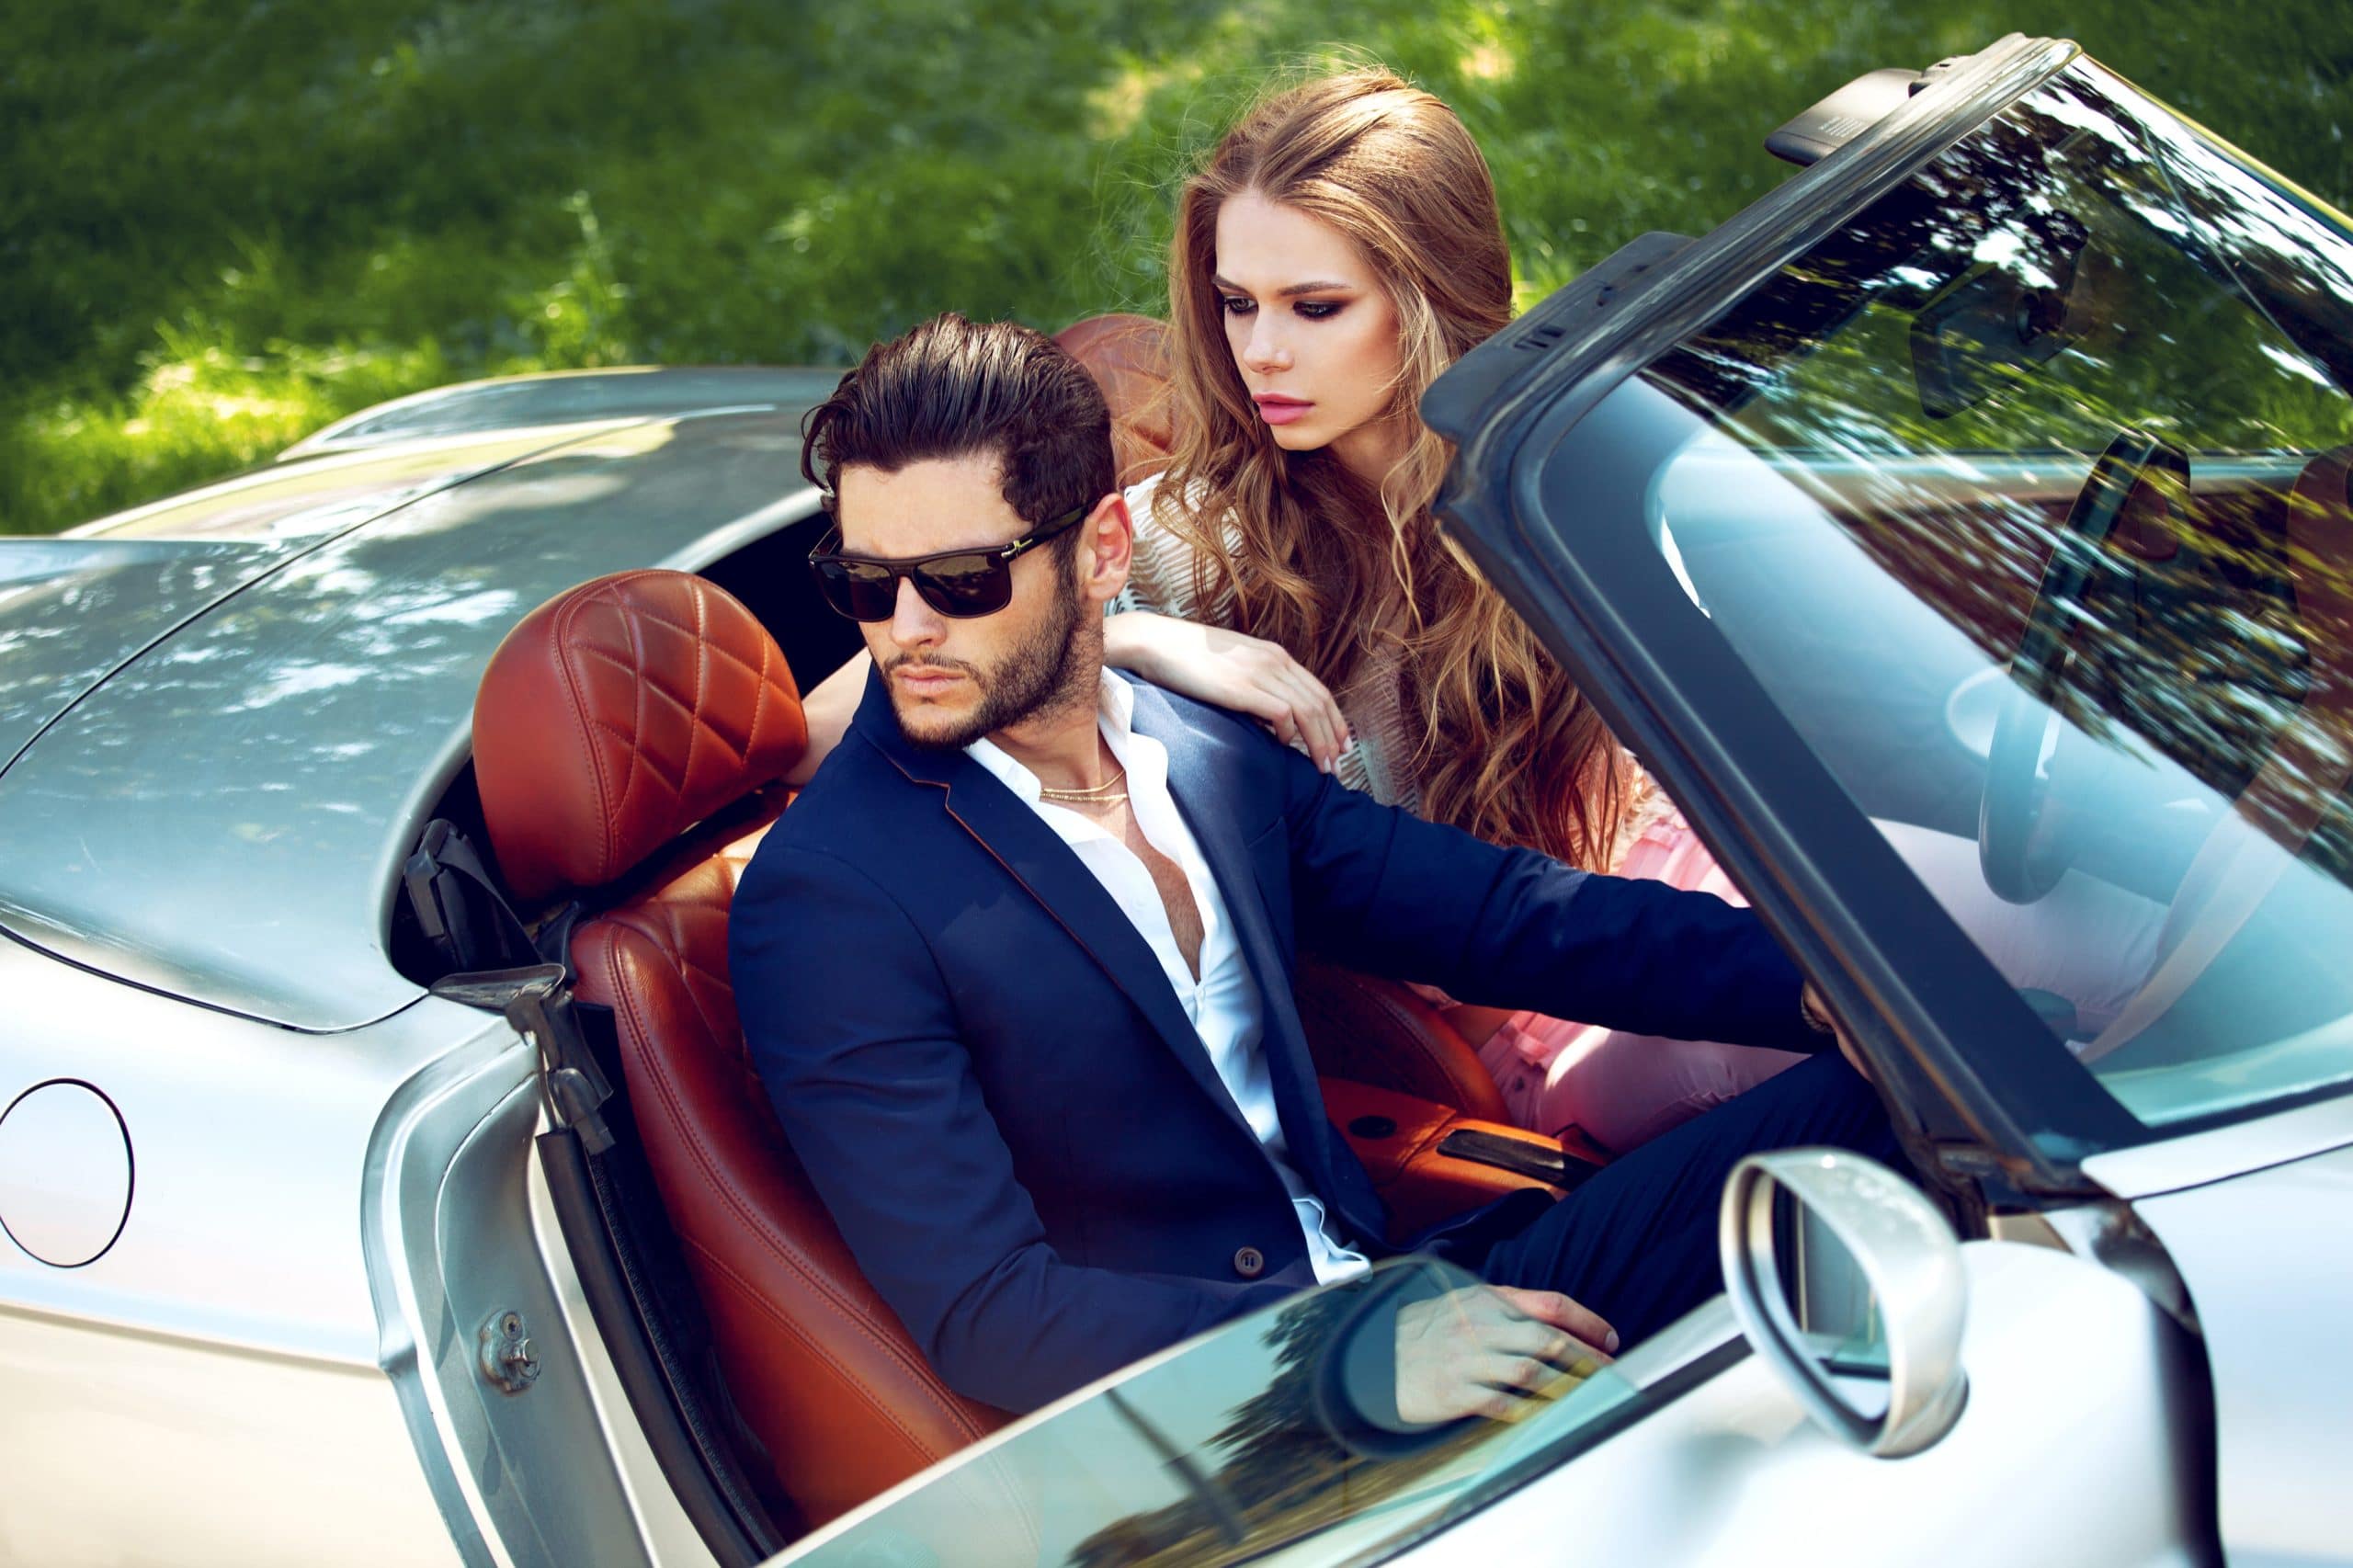 sexy-couple-in-the-car-luxury-life